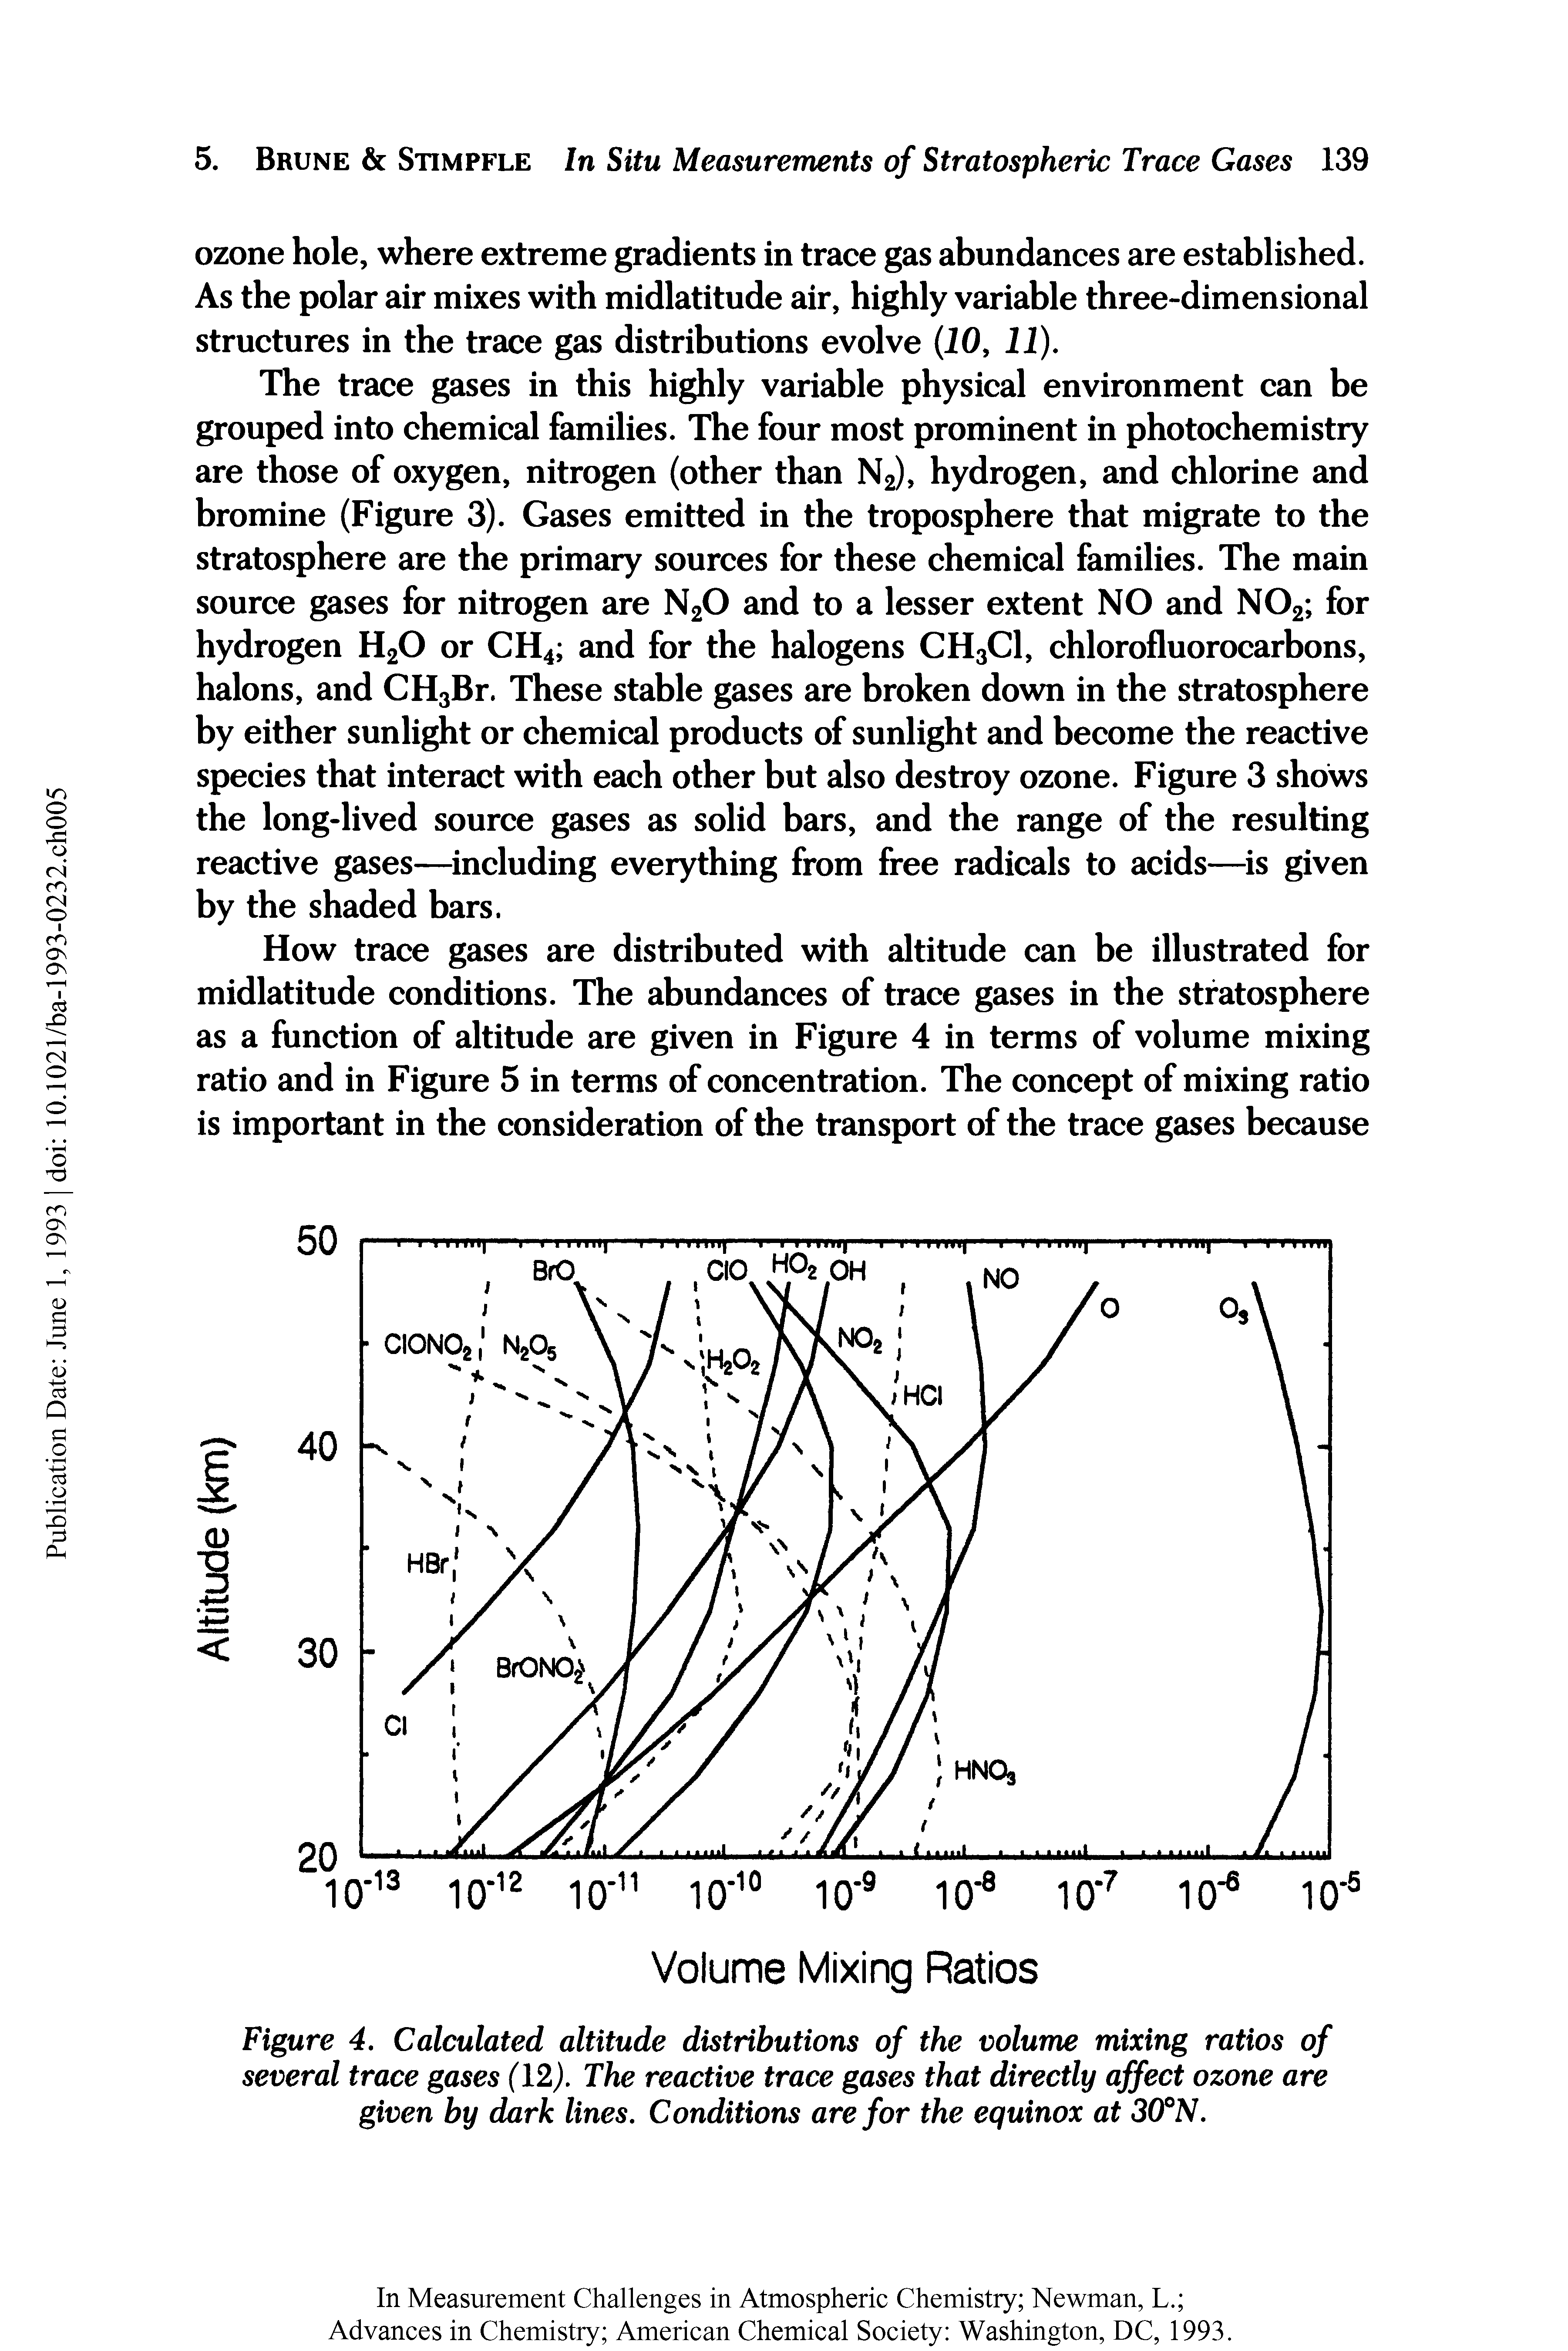 Figure 4. Calculated altitude distributions of the volume mixing ratios of several trace gases (12). The reactive trace gases that directly affect ozone are given by dark lines. Conditions are for the equinox at 30°N.